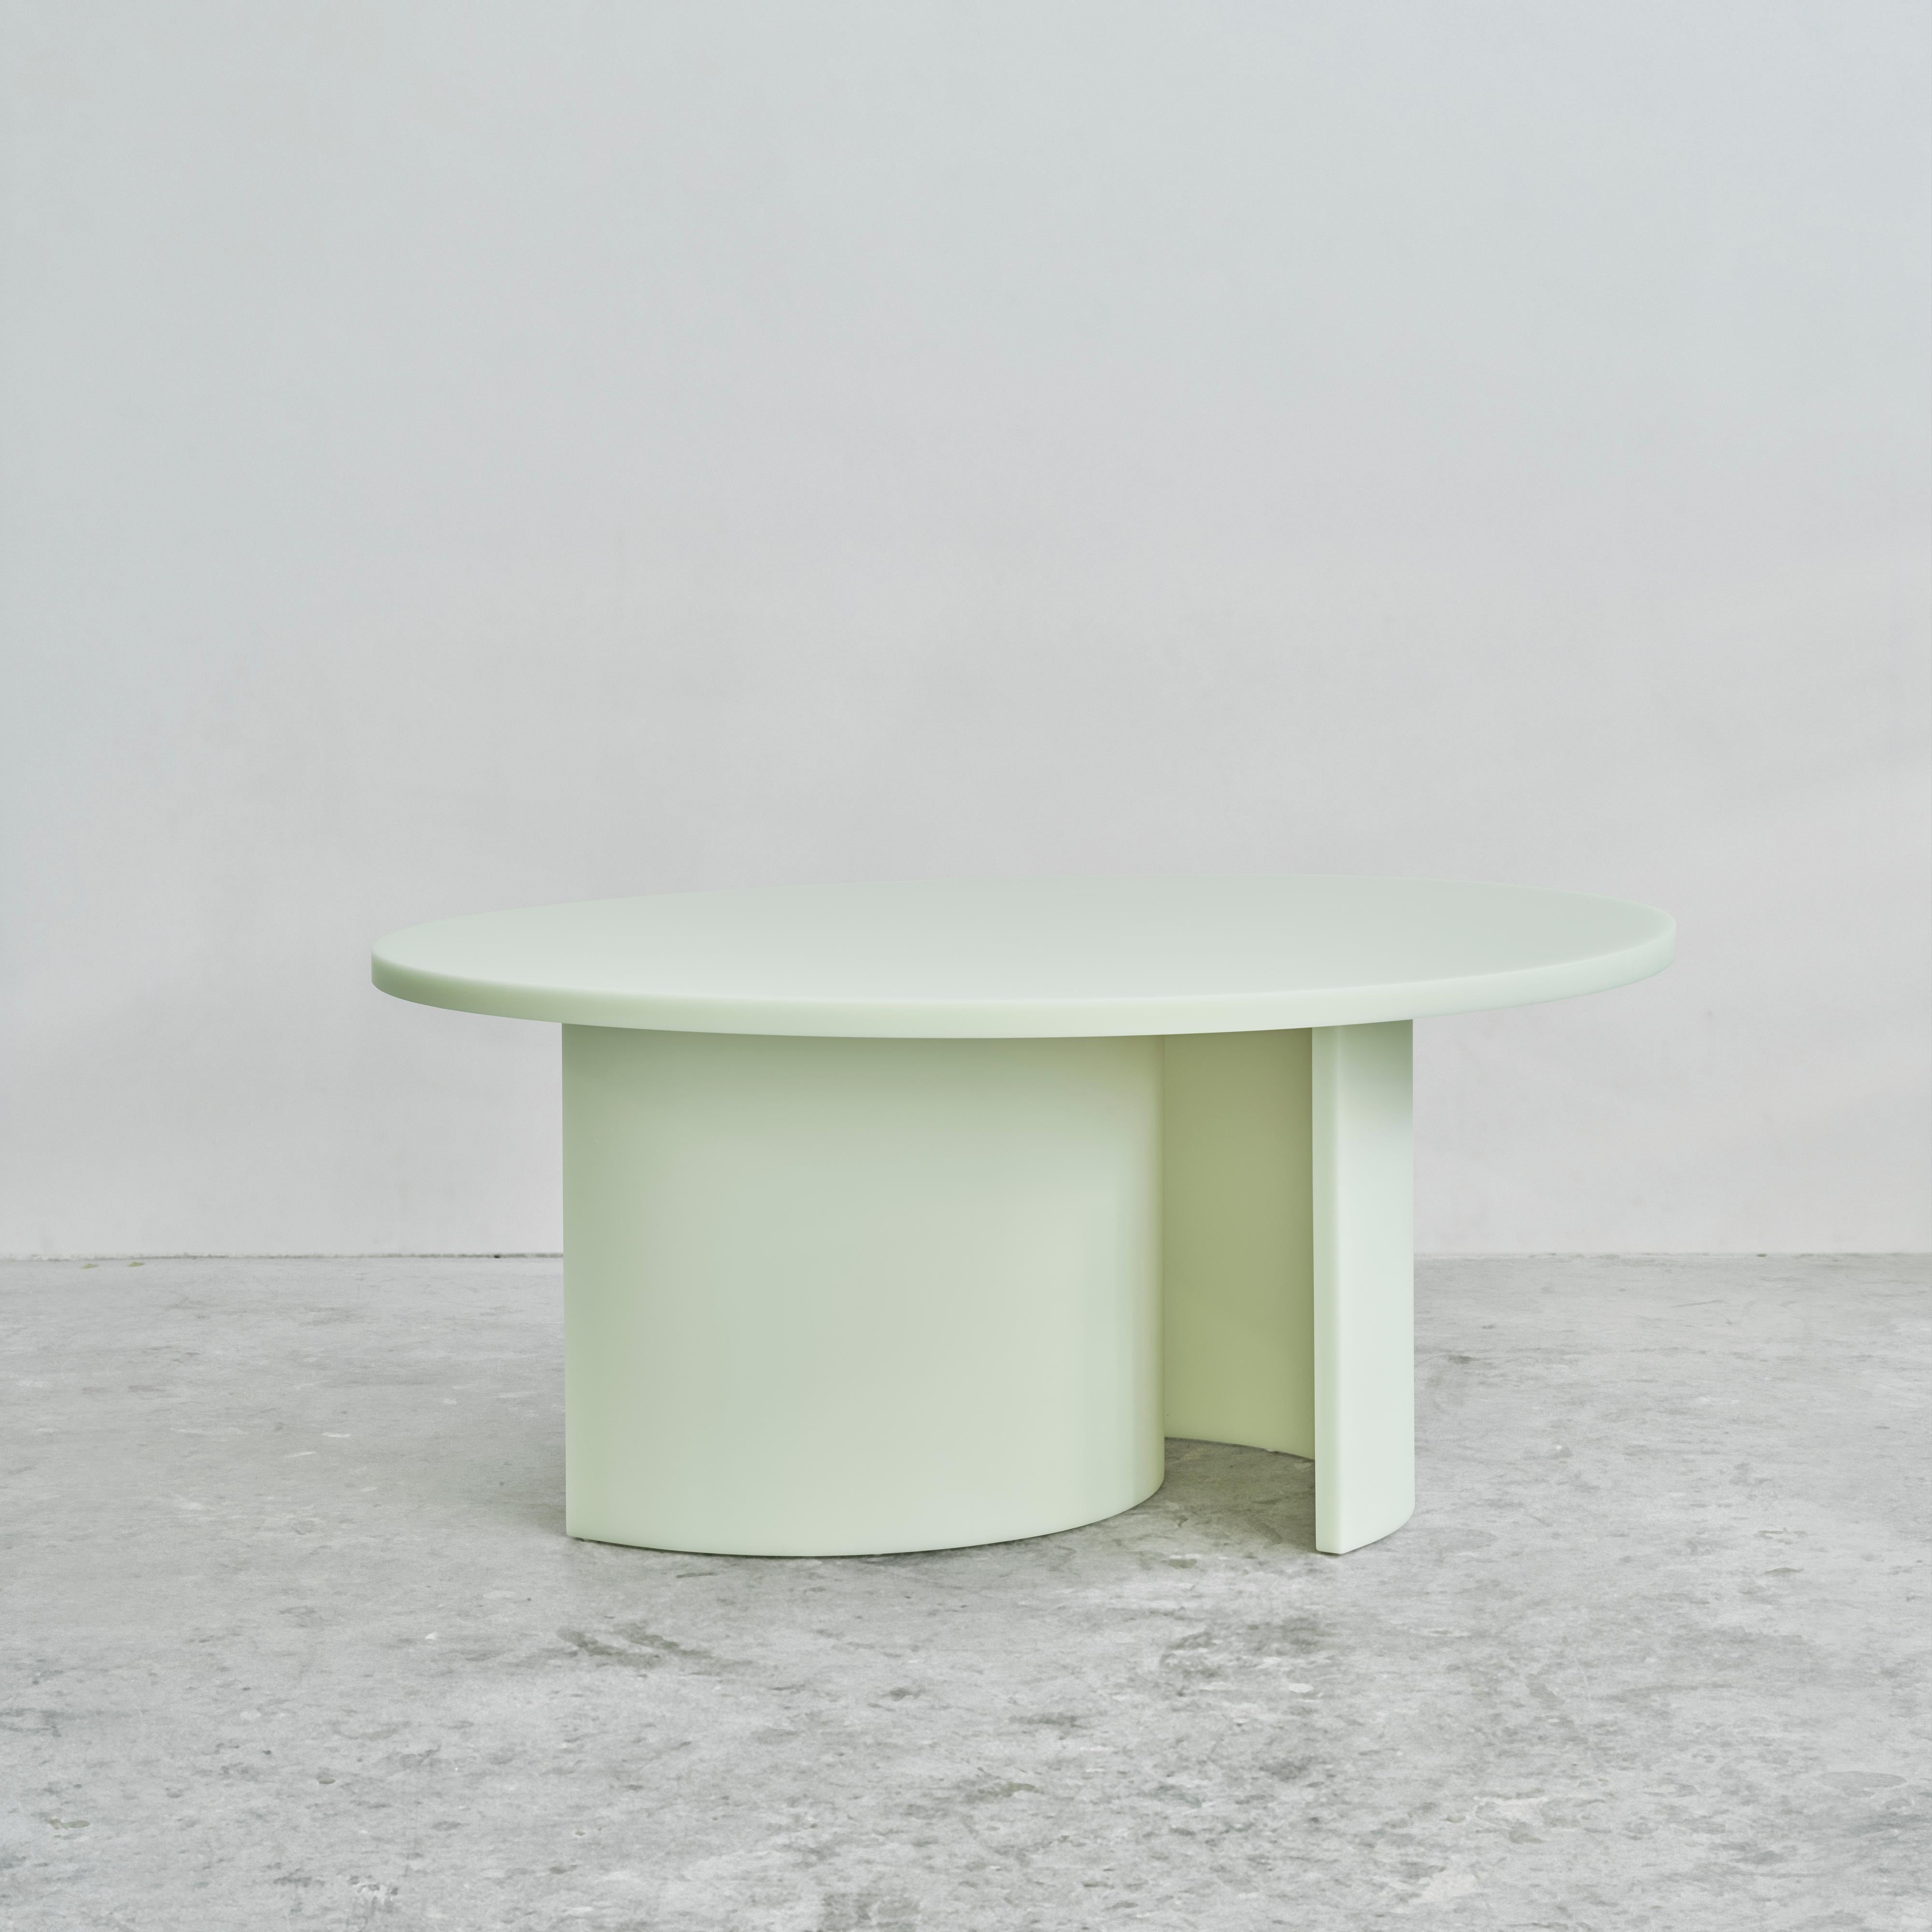 Sabine Marcelis’ SOAP Table is a dynamic dinner setting, featuring her signature resin with a soapy matte surface, now with cylinder column legs and the beautiful fresh green colour. It is designed with the sound psychology of dining in mind. So